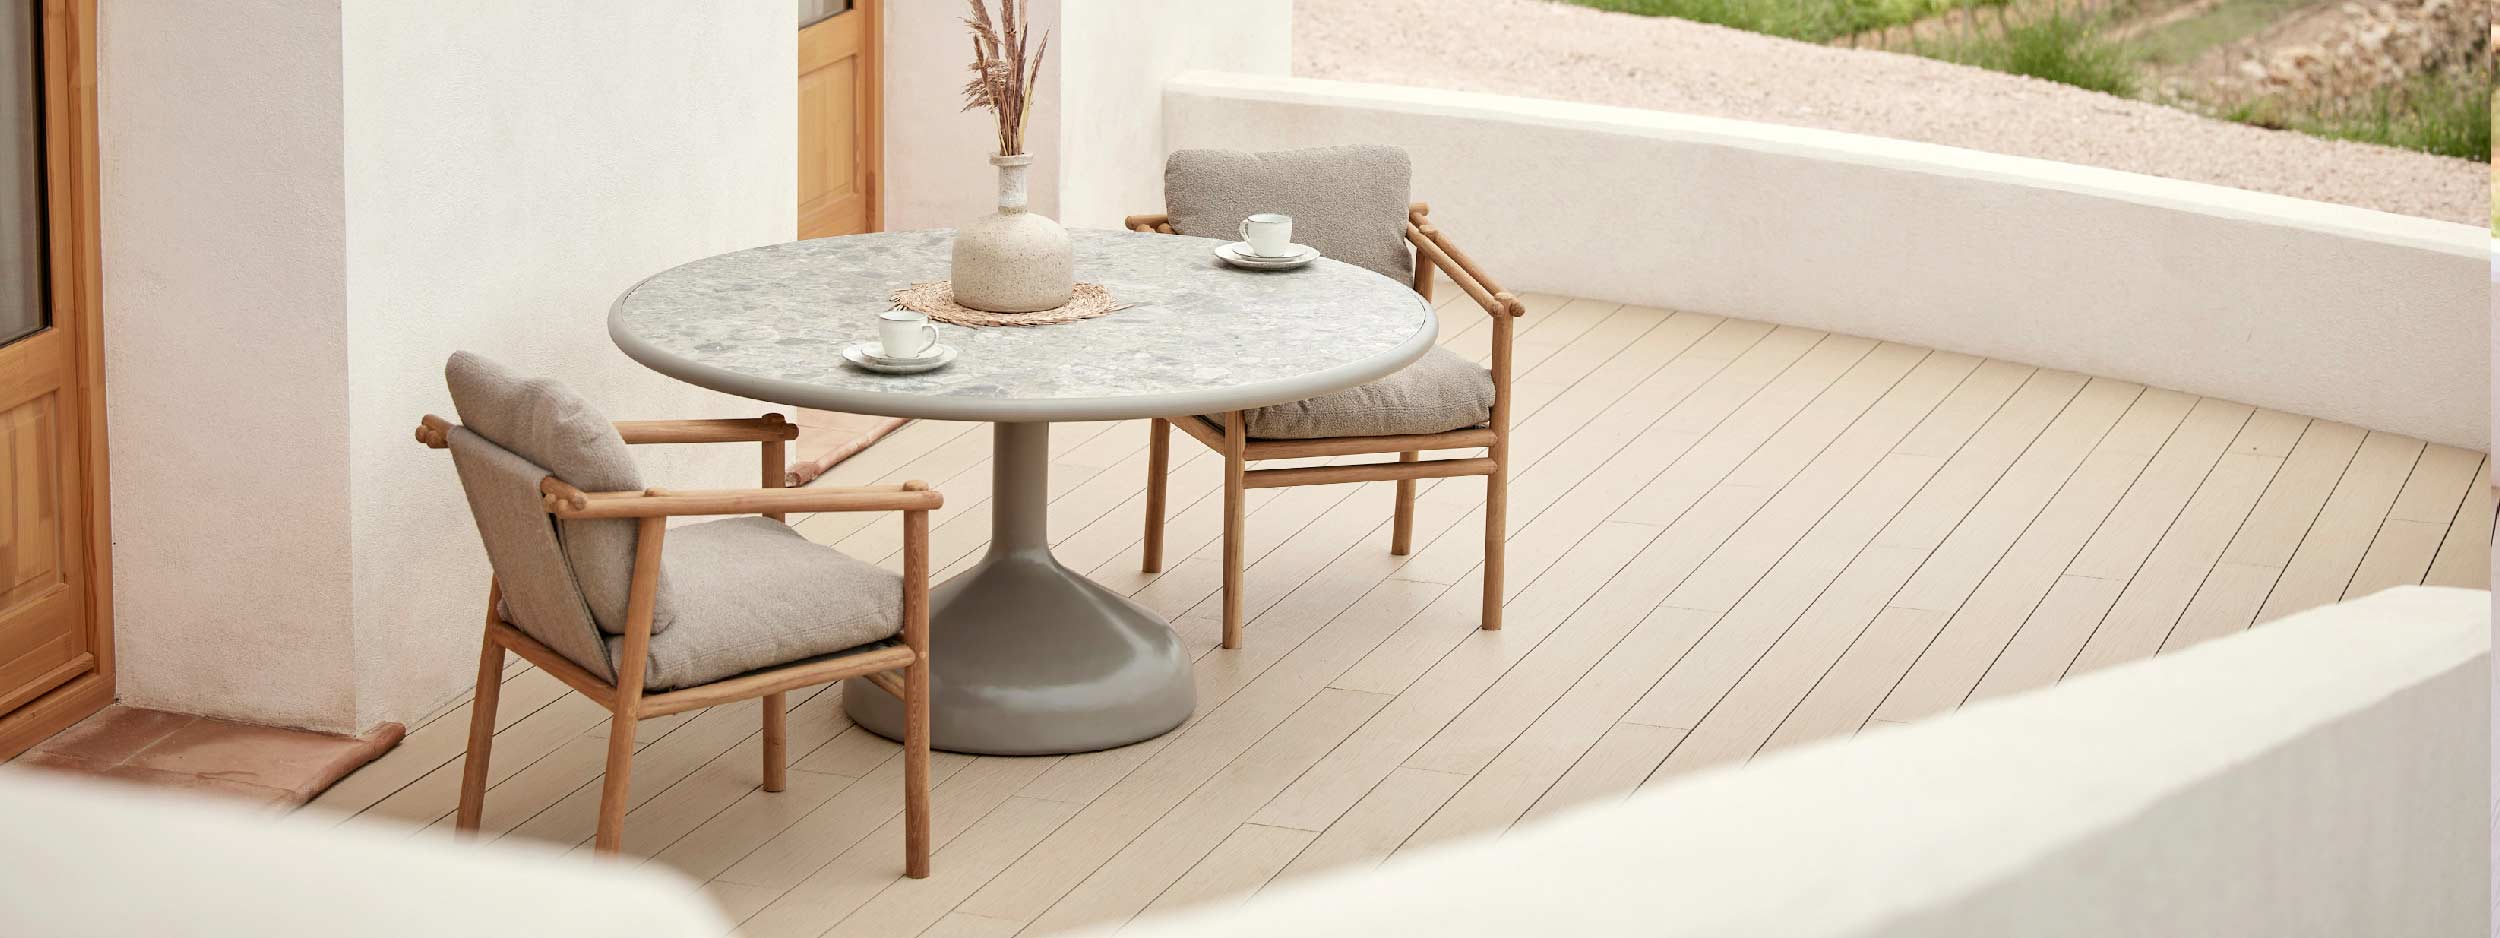 Image of Sticks teak garden chairs and Glaze round ceramic dining table